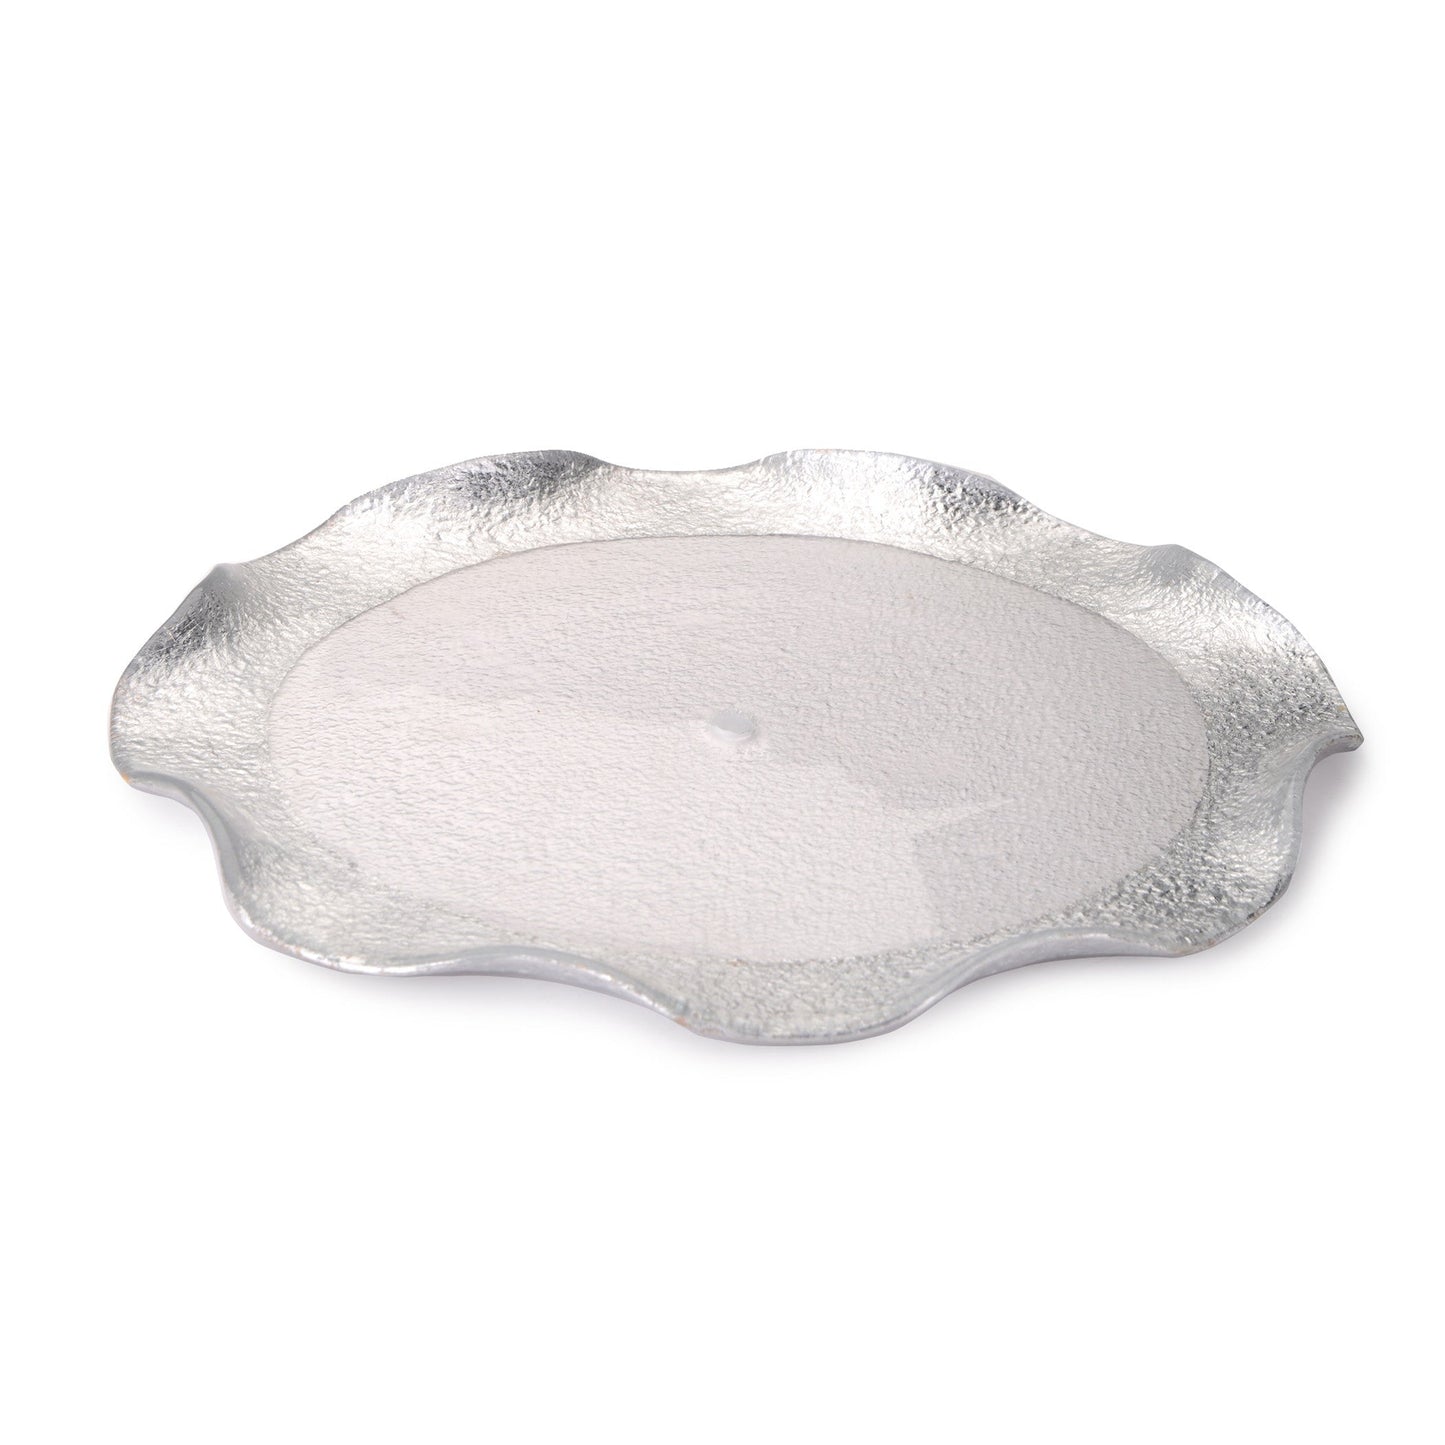 Classic Touch Decor 9" Set Of 4 Silver Wavy Plates, Glass